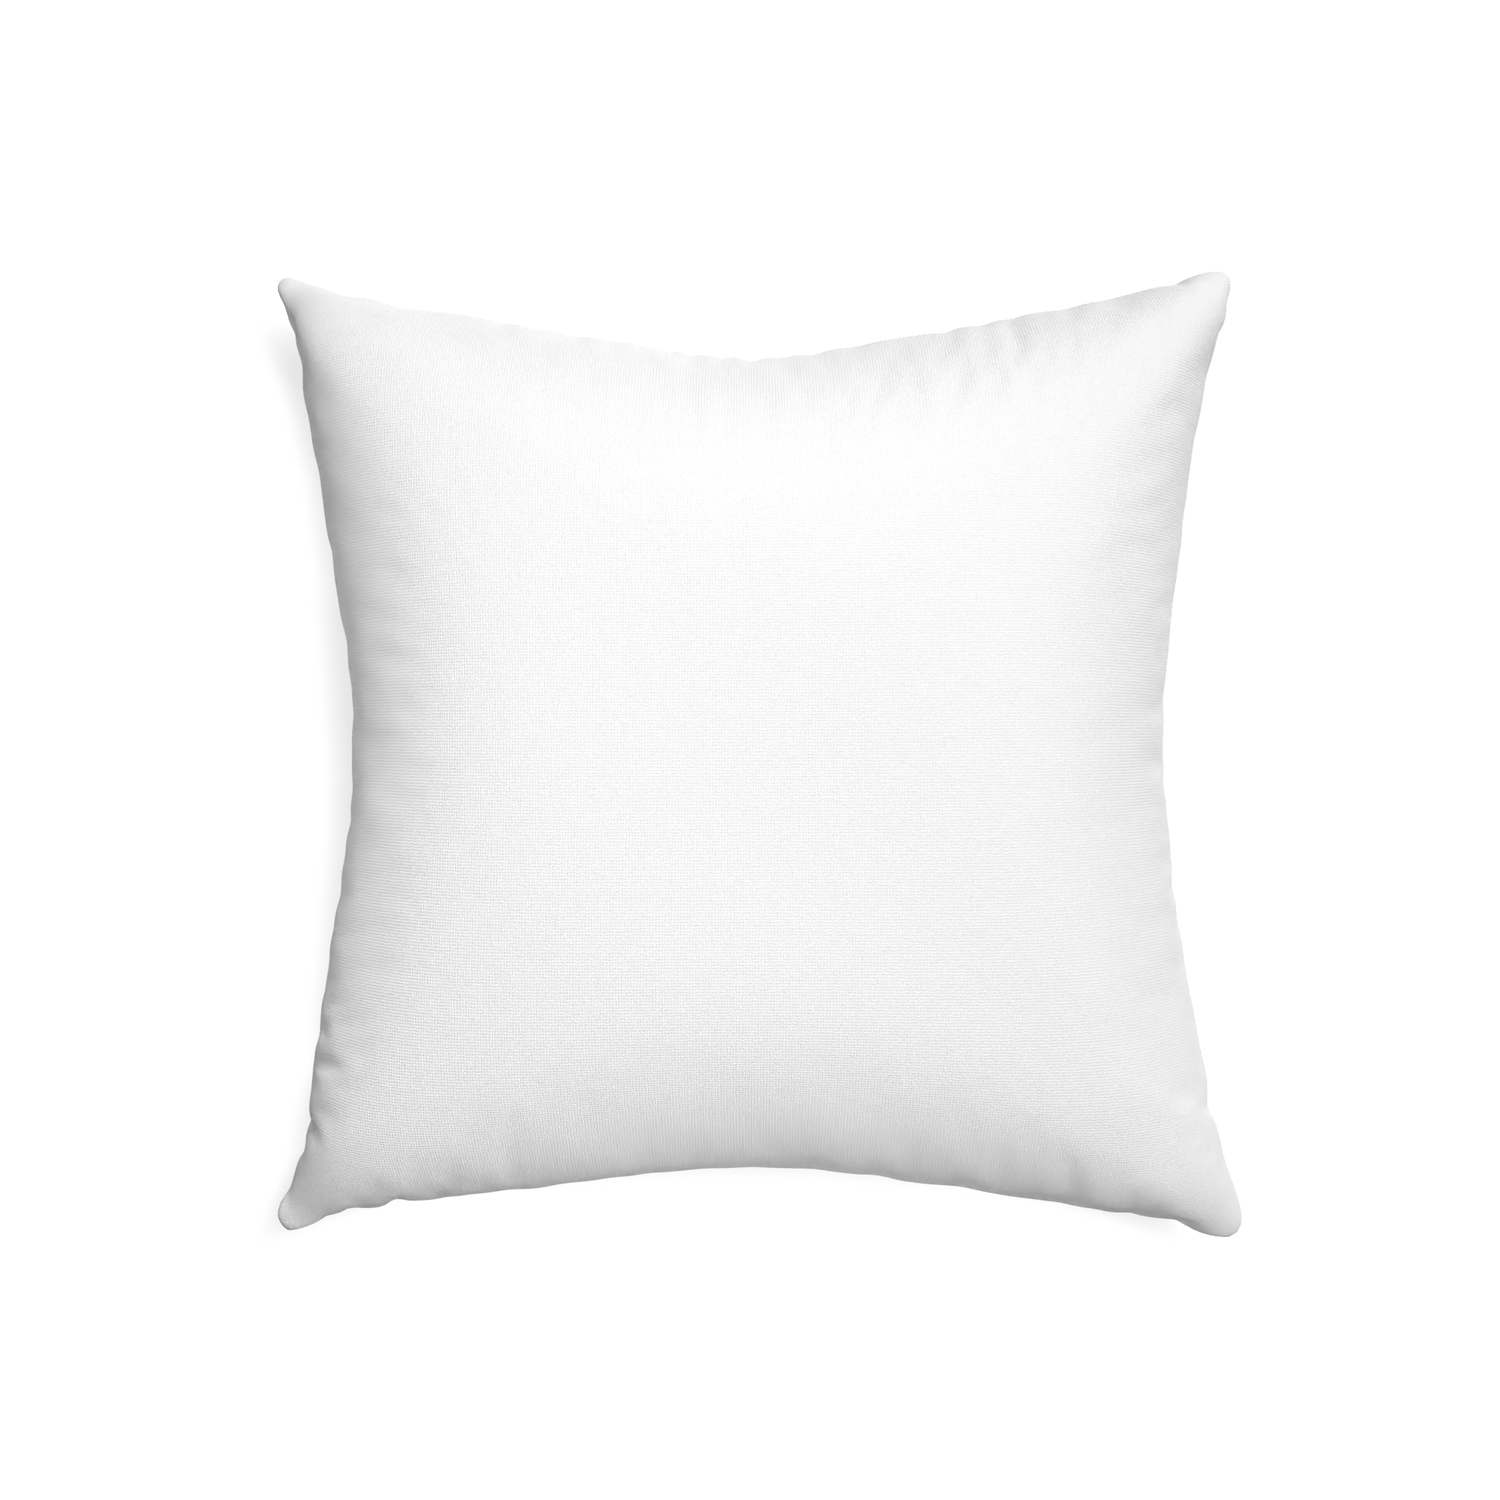 22-square snow custom white cottonpillow with none on white background